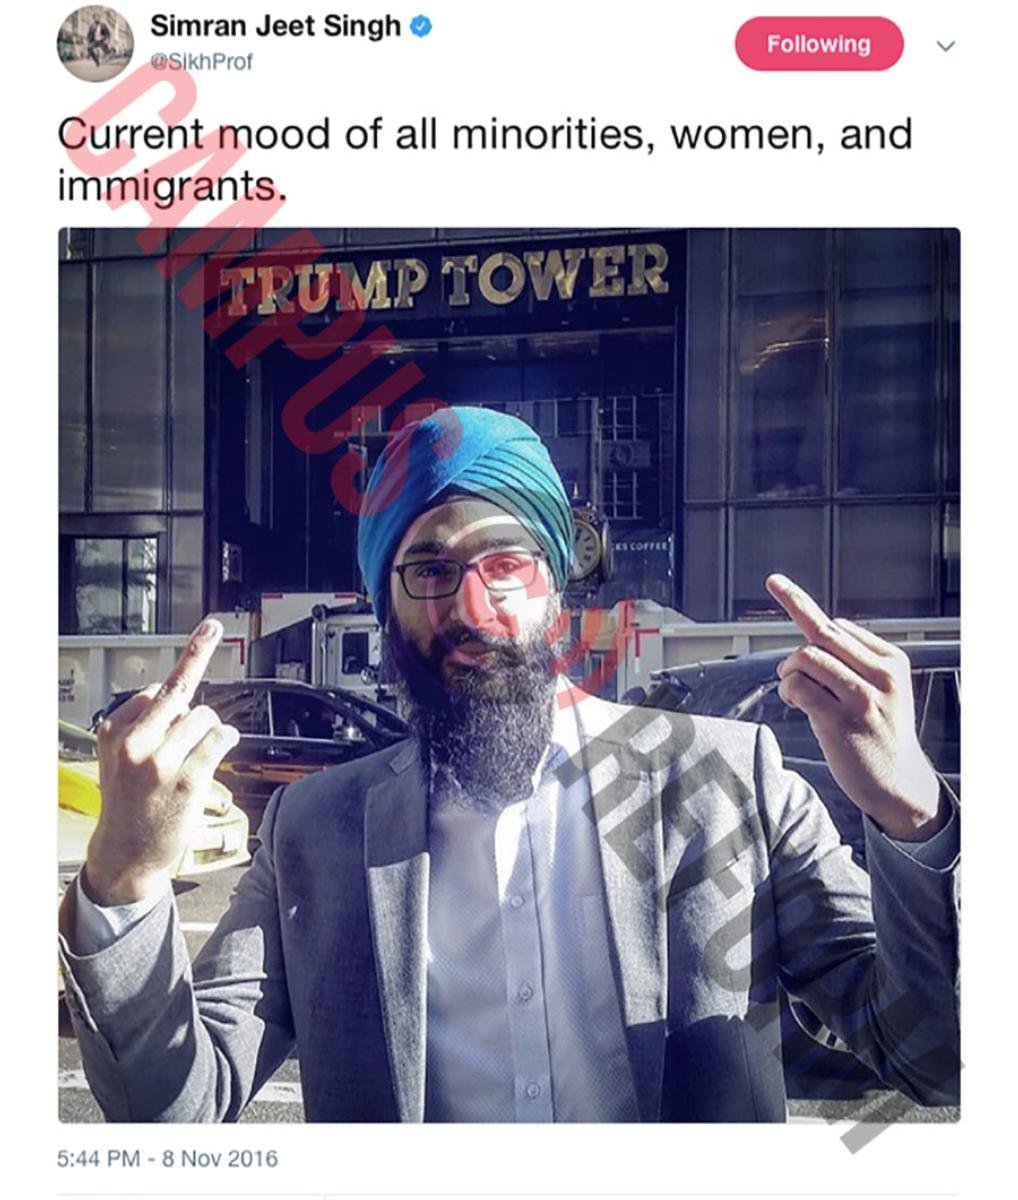 November 2016 tweet by Simran Jeet Singh. Text: Current mood of all minorities, women and immigrants. Photo shows a man making a rude gesture in front of Trump Tower in New York.